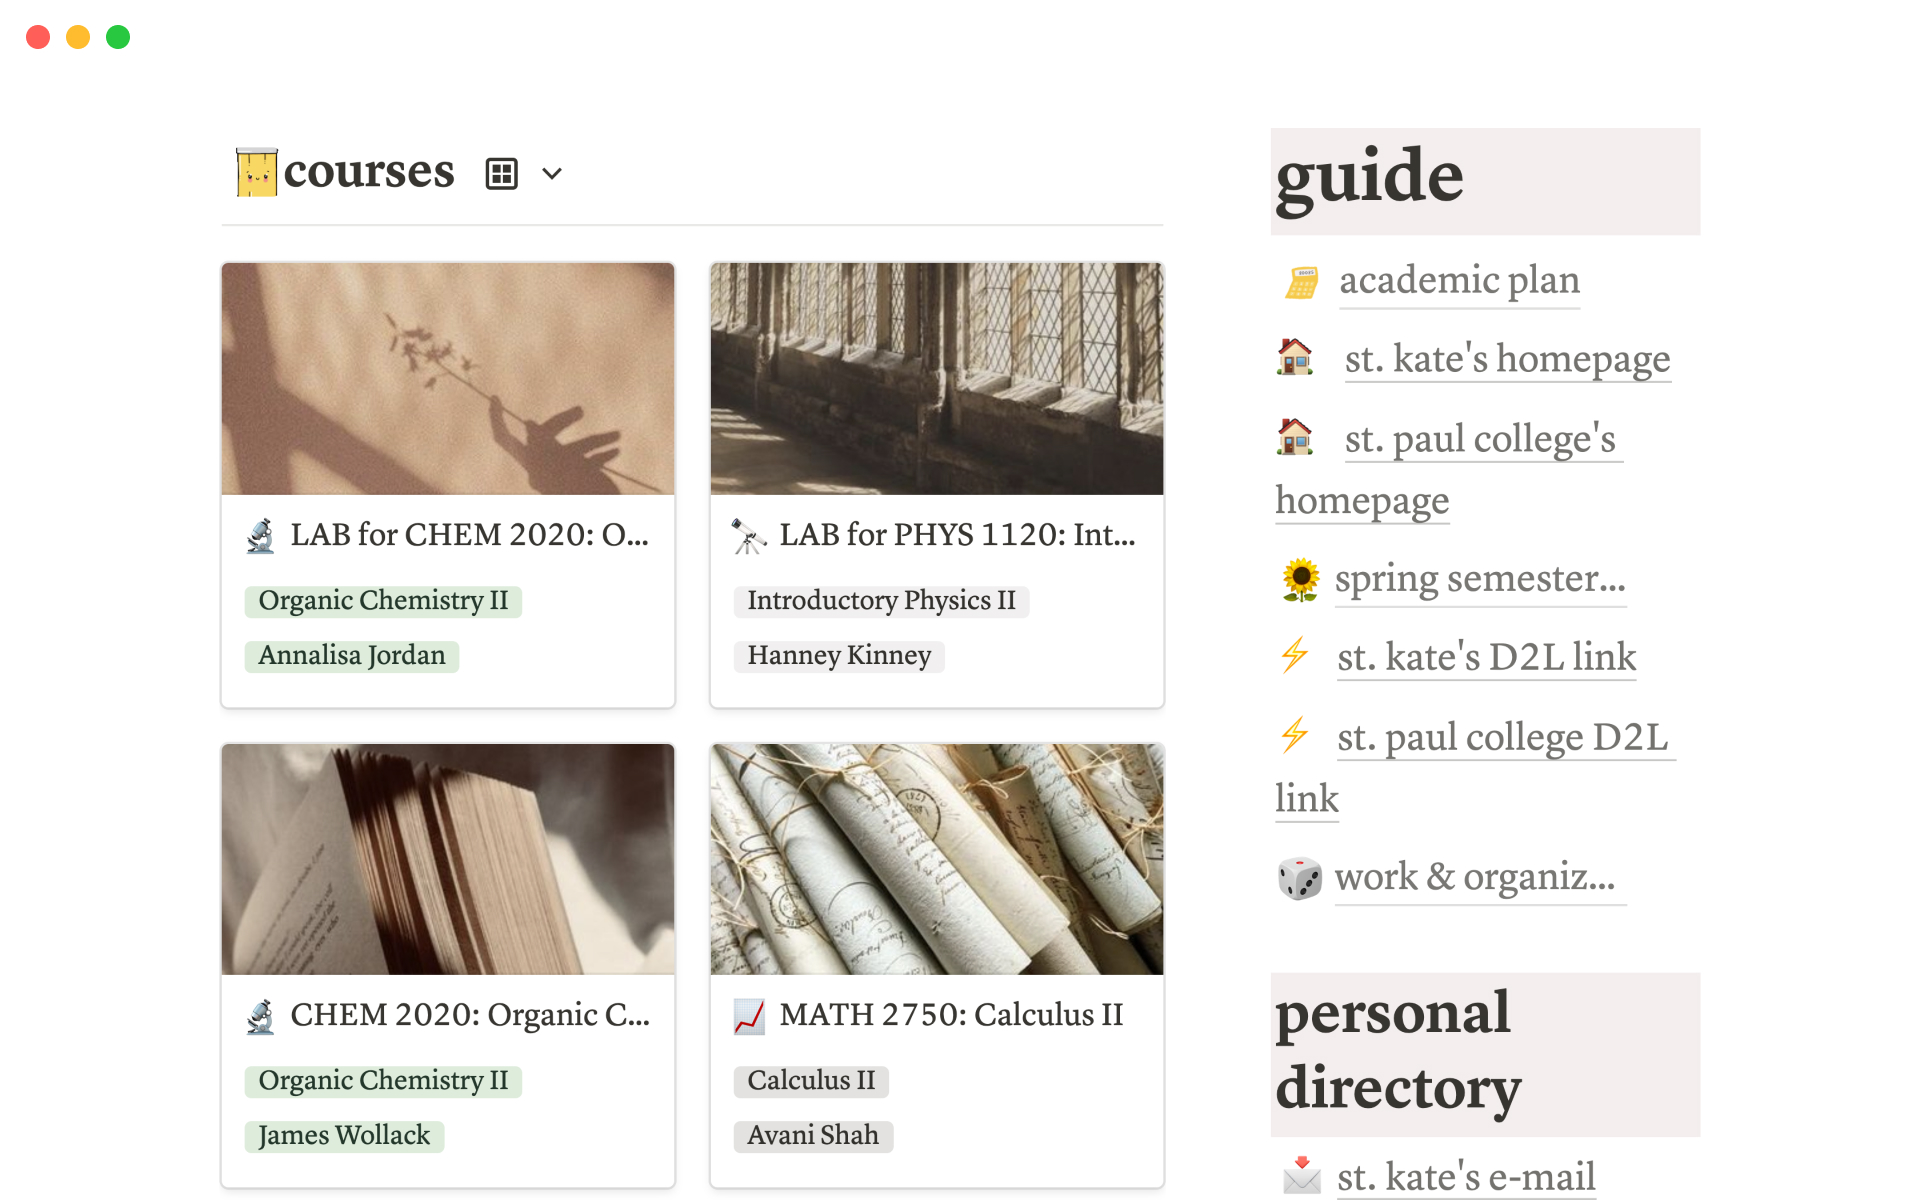 Organize your academics, personal interests, and favorite things all in one place.